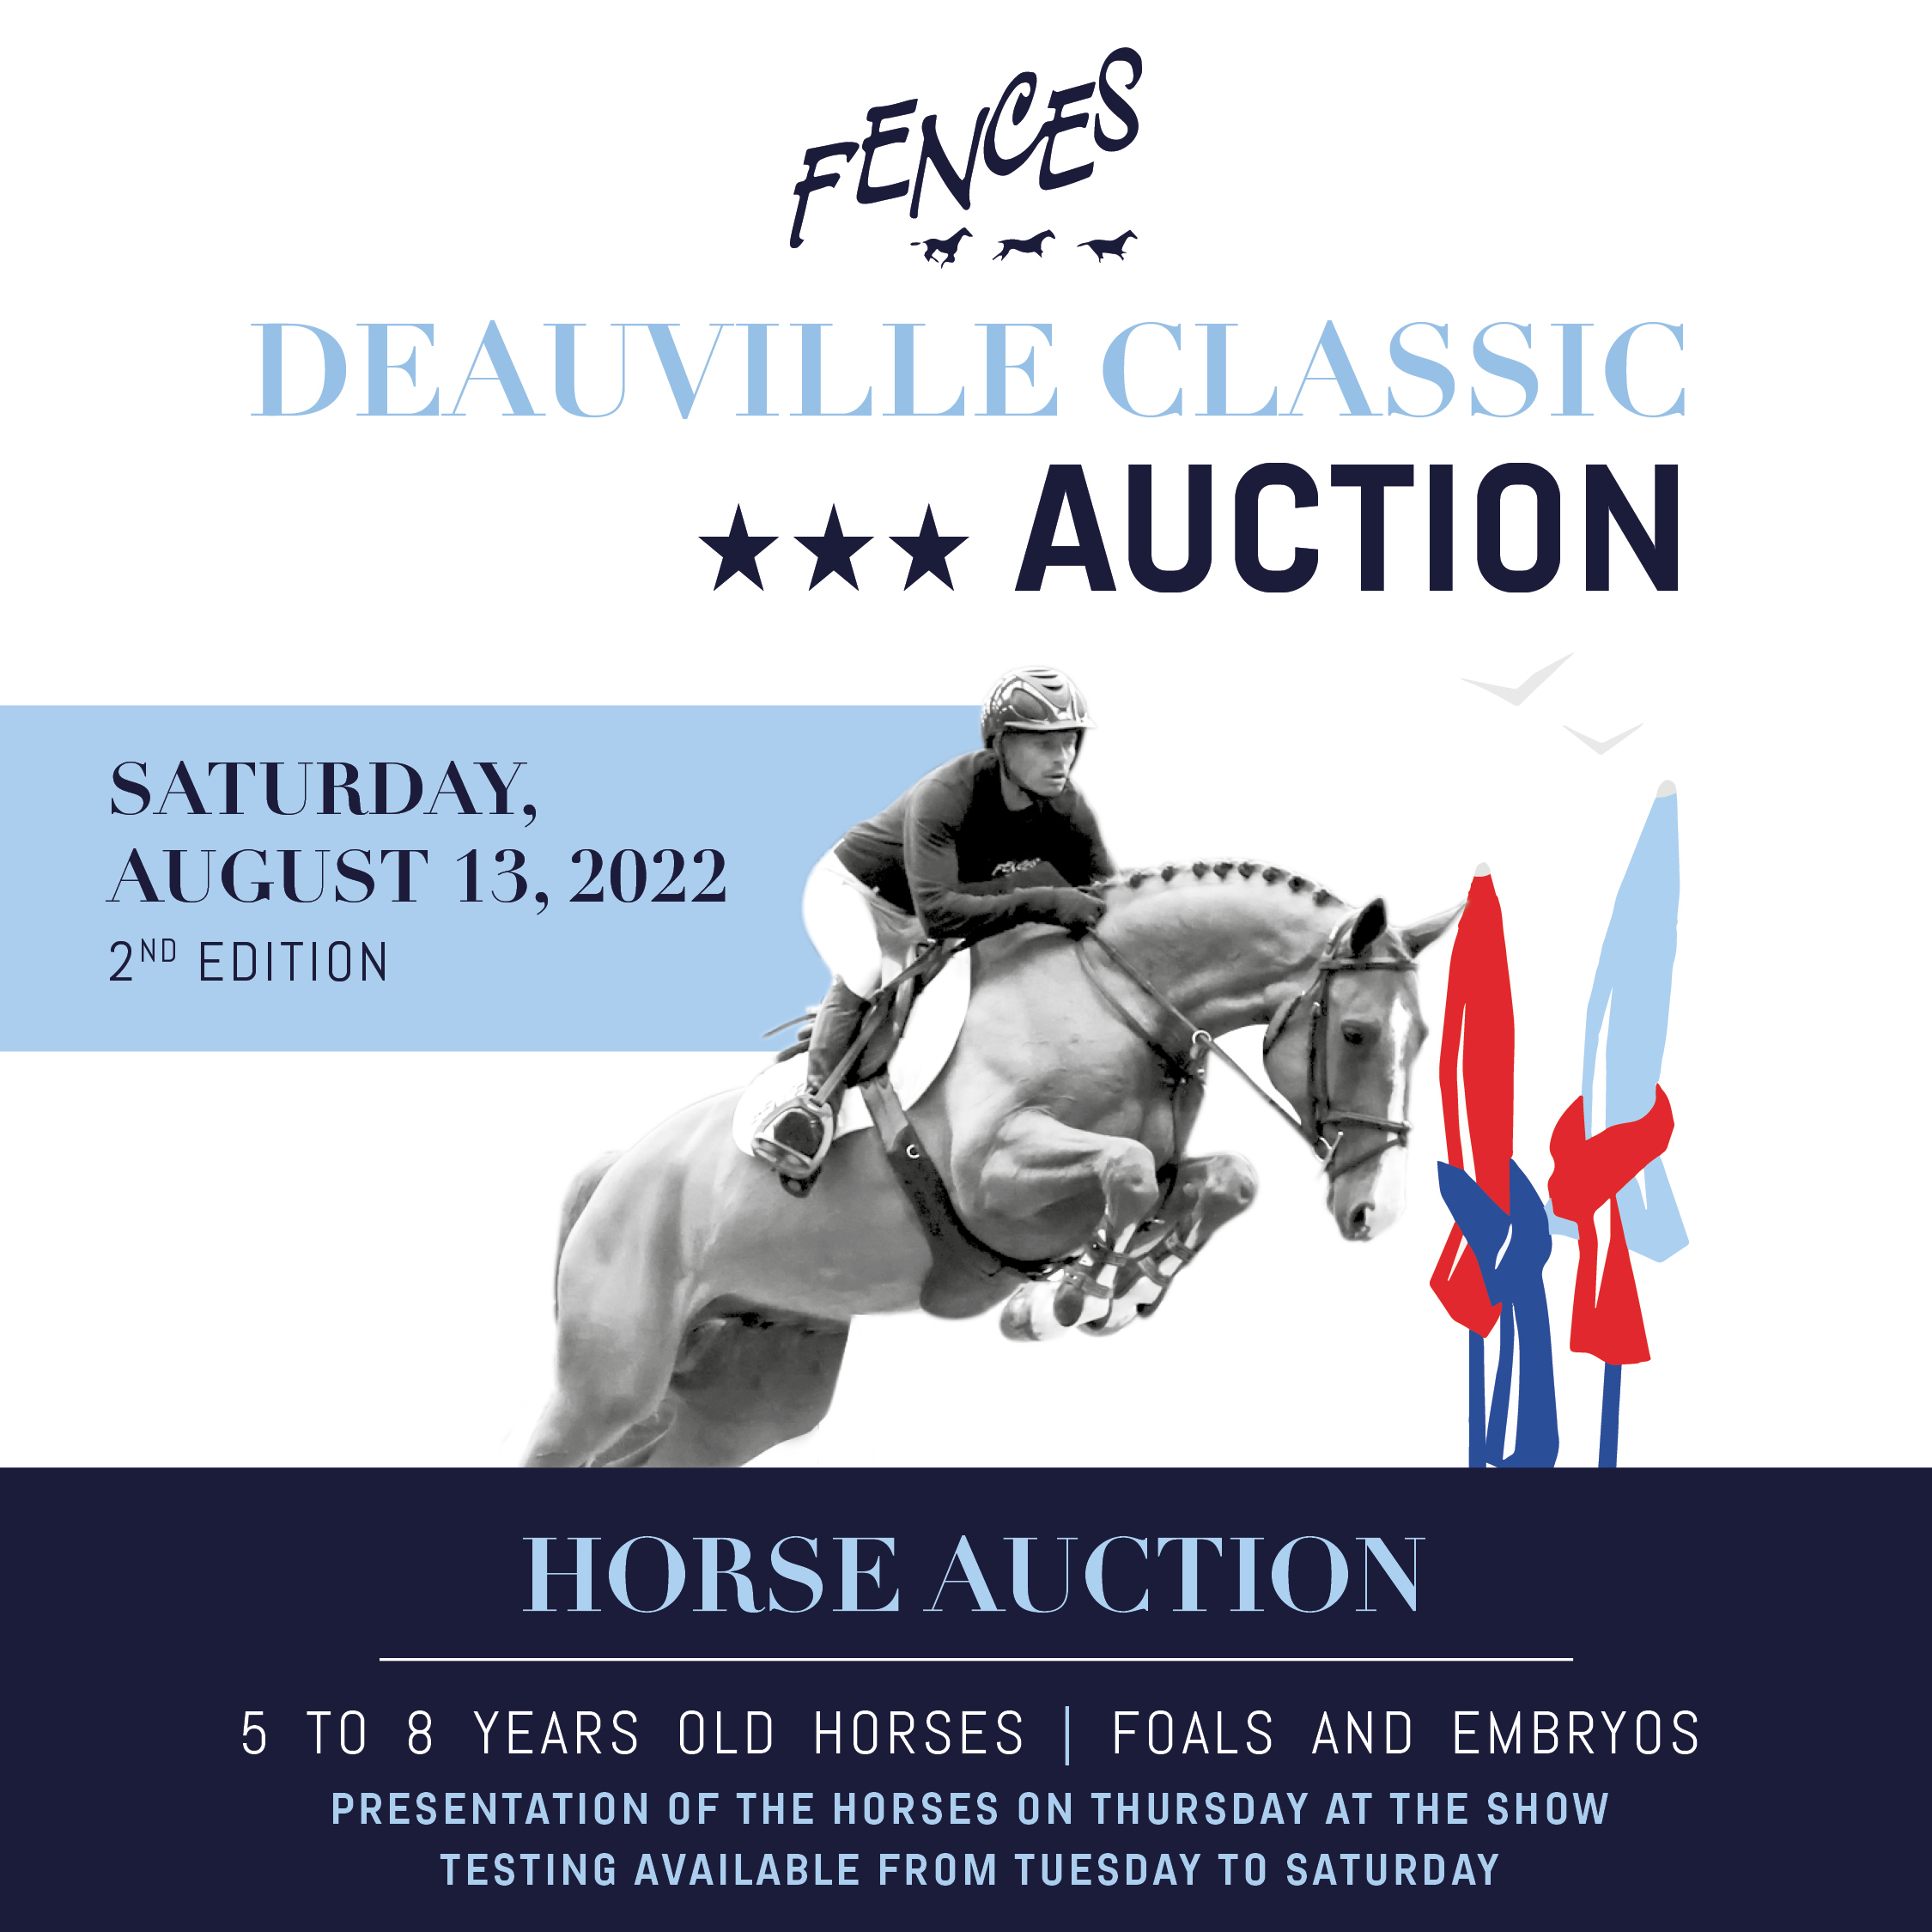 Deauville Classic Auction returns for a 2nd edition